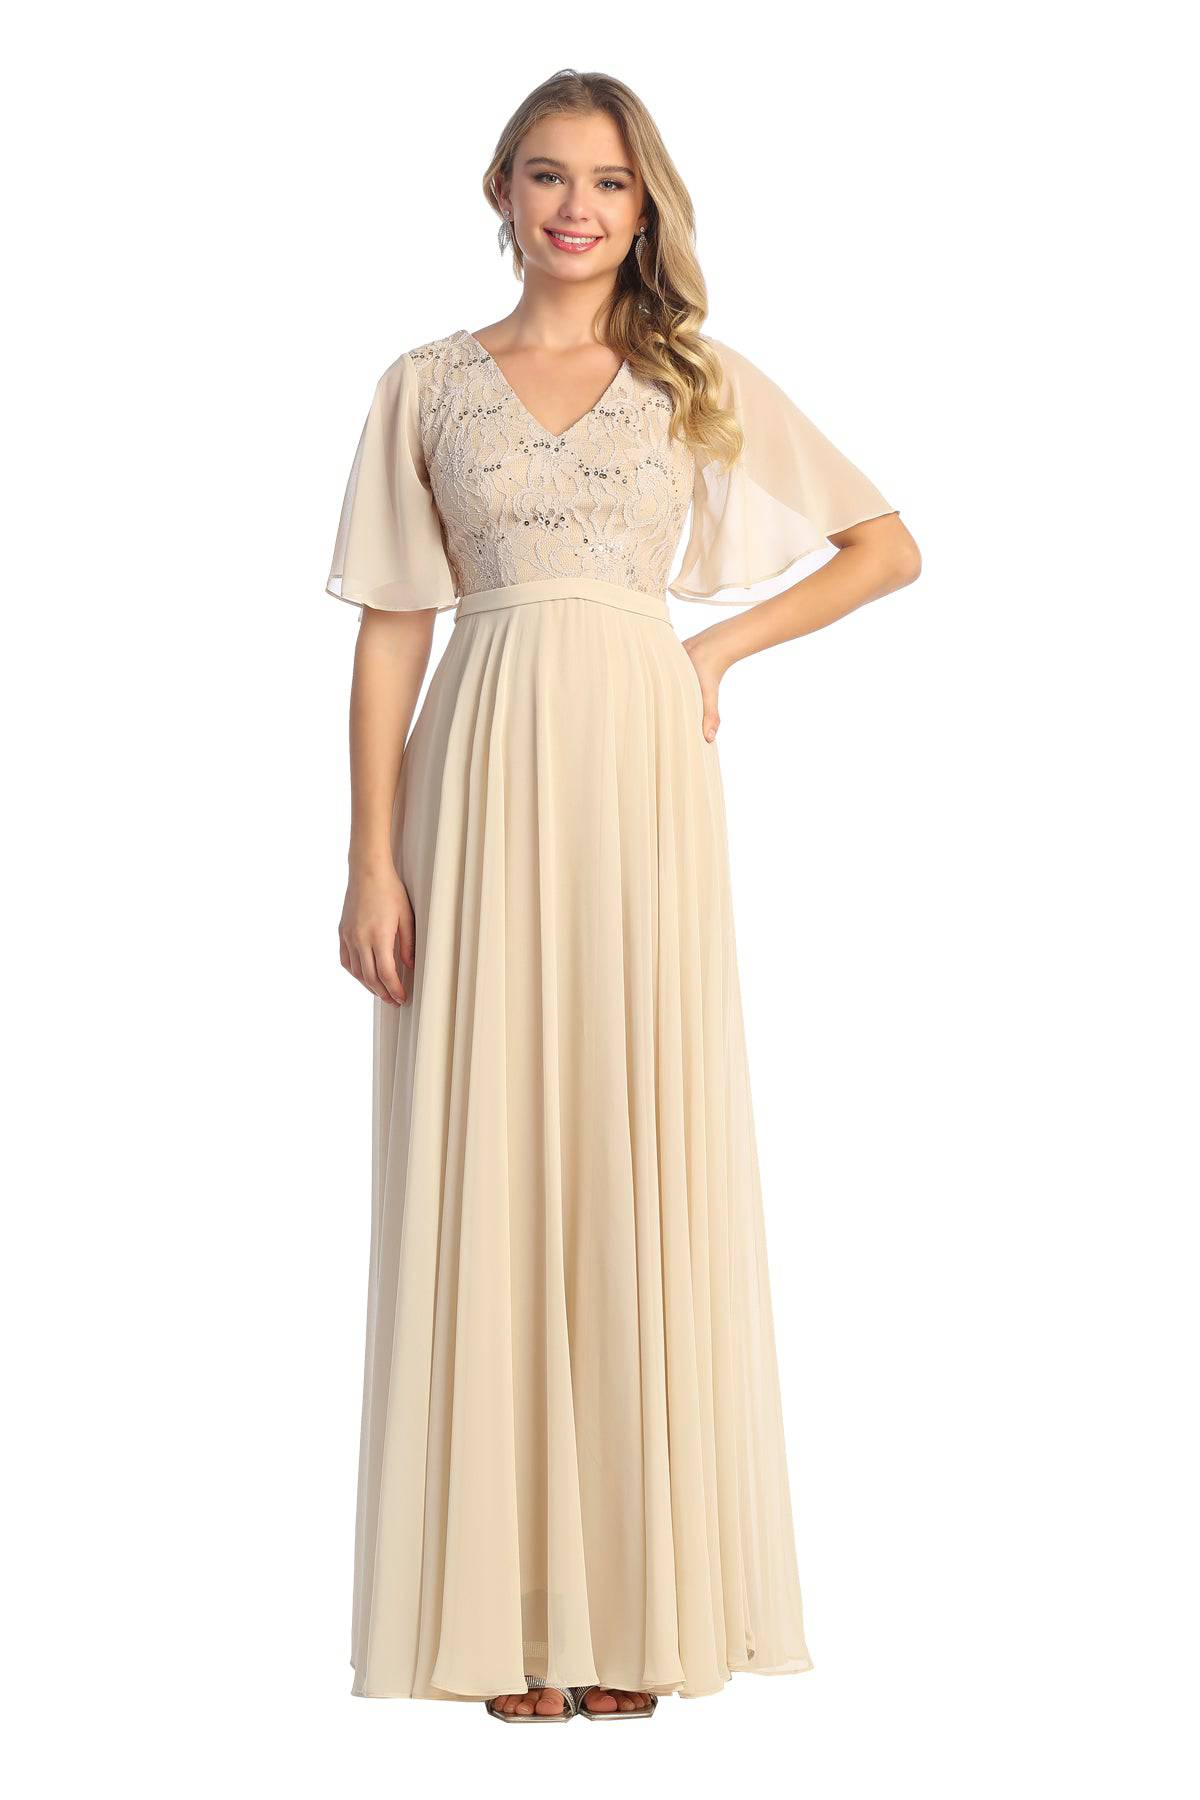 Cindy Collection 1696 Short Sleeve Mother of the Bride Dress - NORMA REED